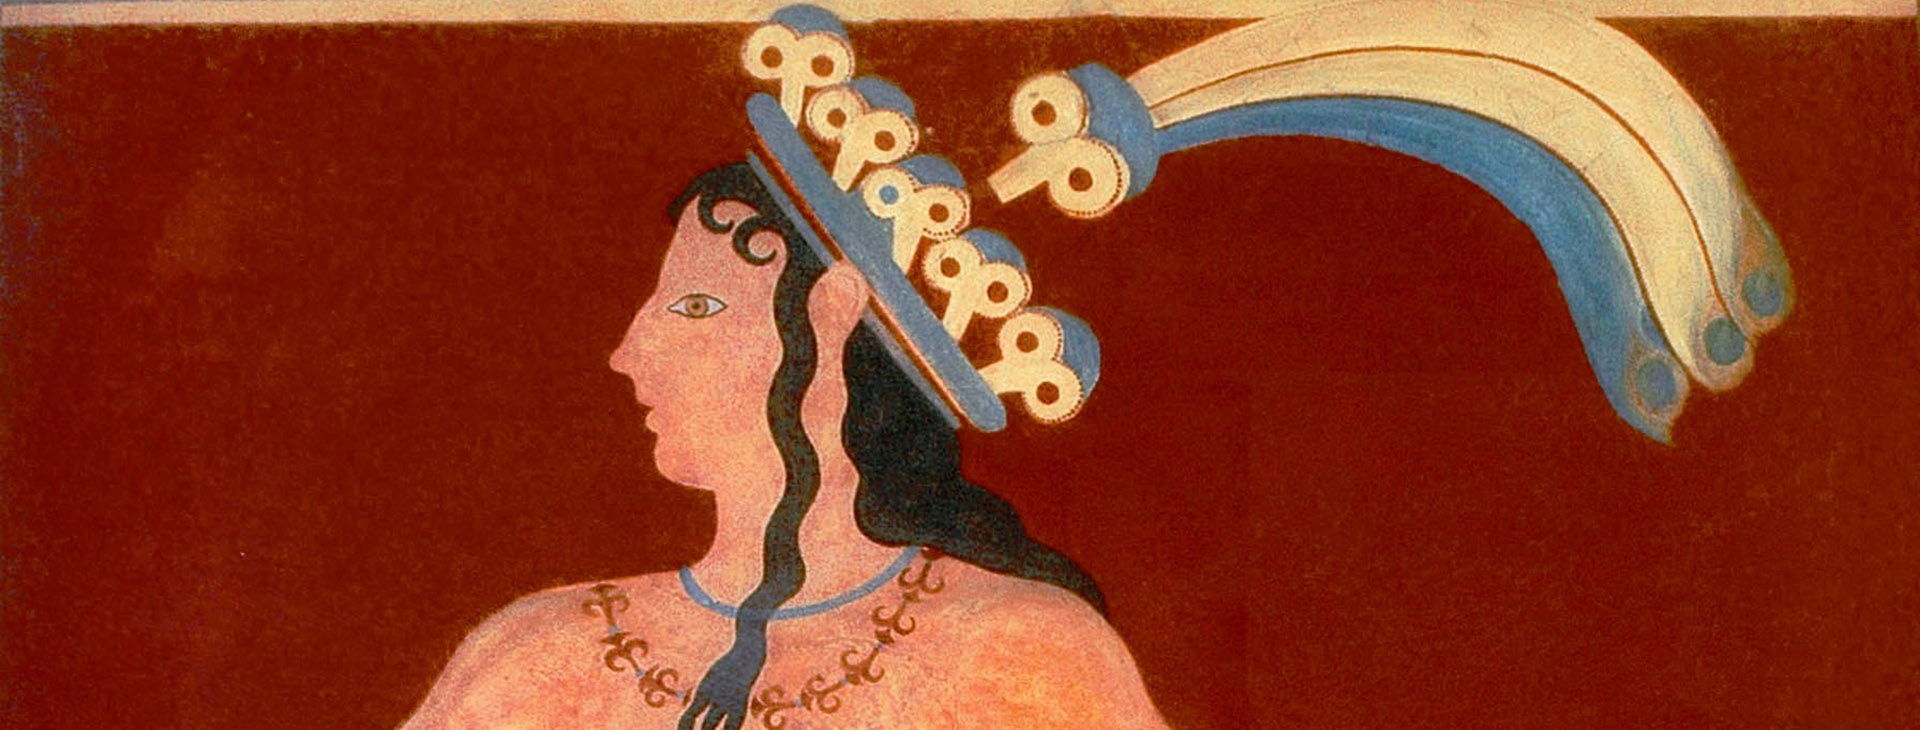 Prince of lillies, fresco at the Minoan palace of Knossos, Heraklion